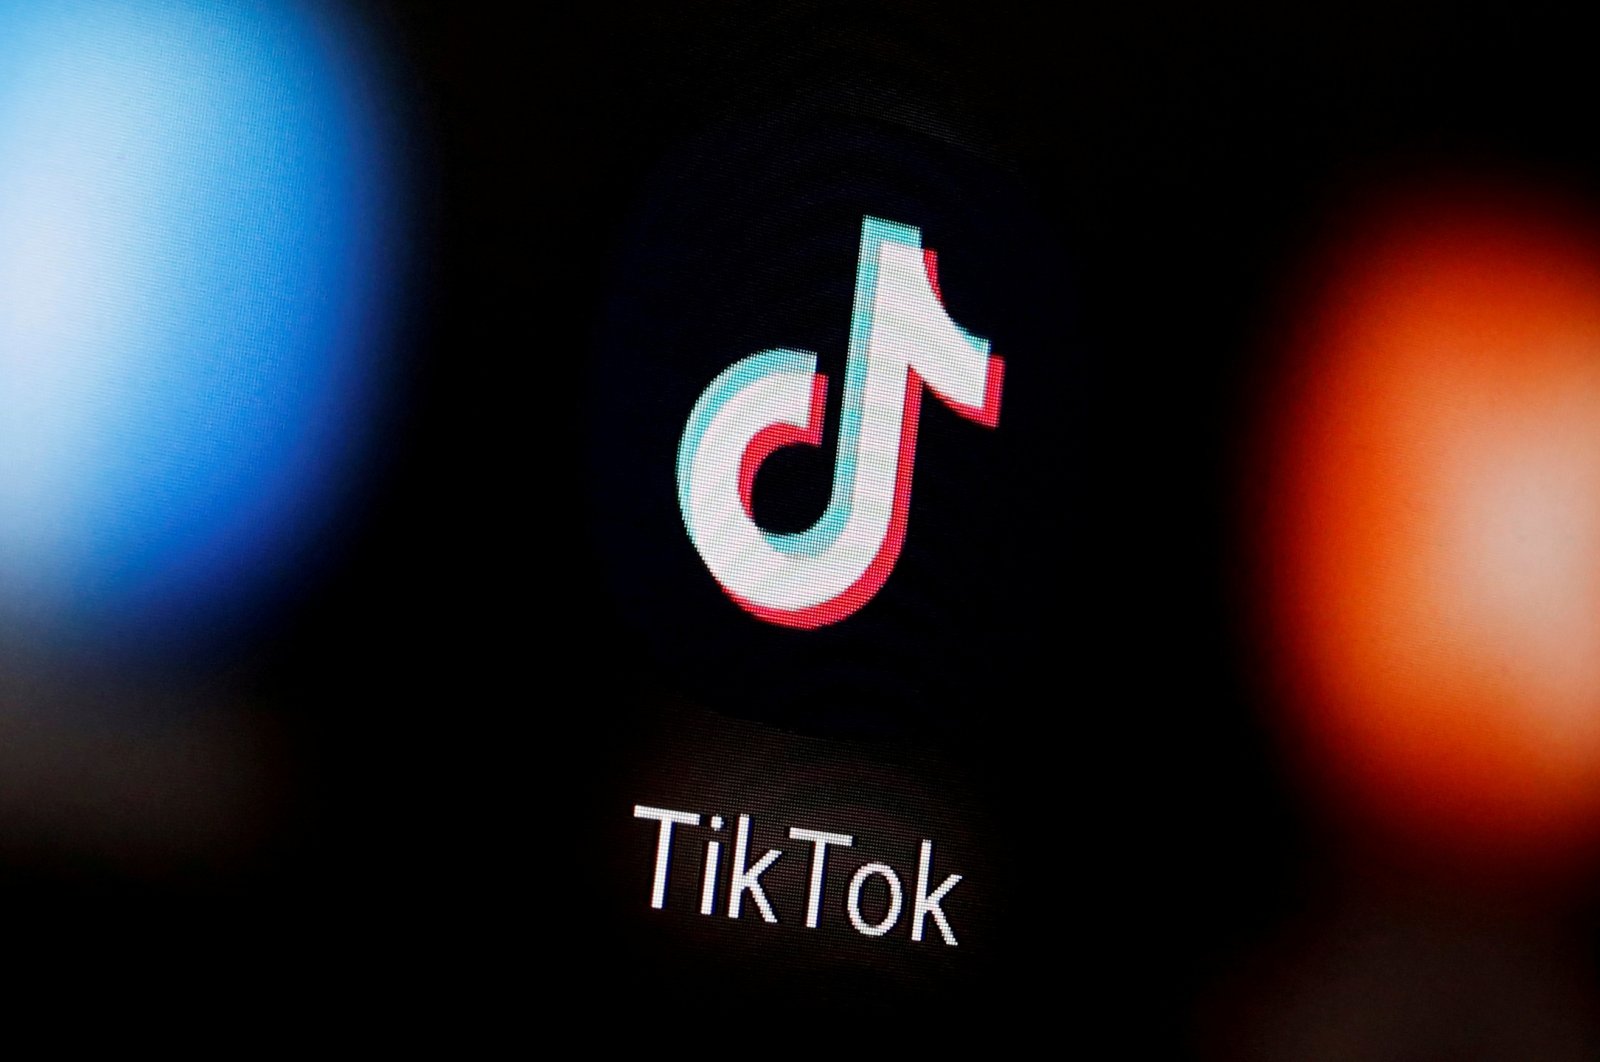 A TikTok logo is displayed on a smartphone in this illustration taken Jan. 6, 2020. (Reuters Photo)